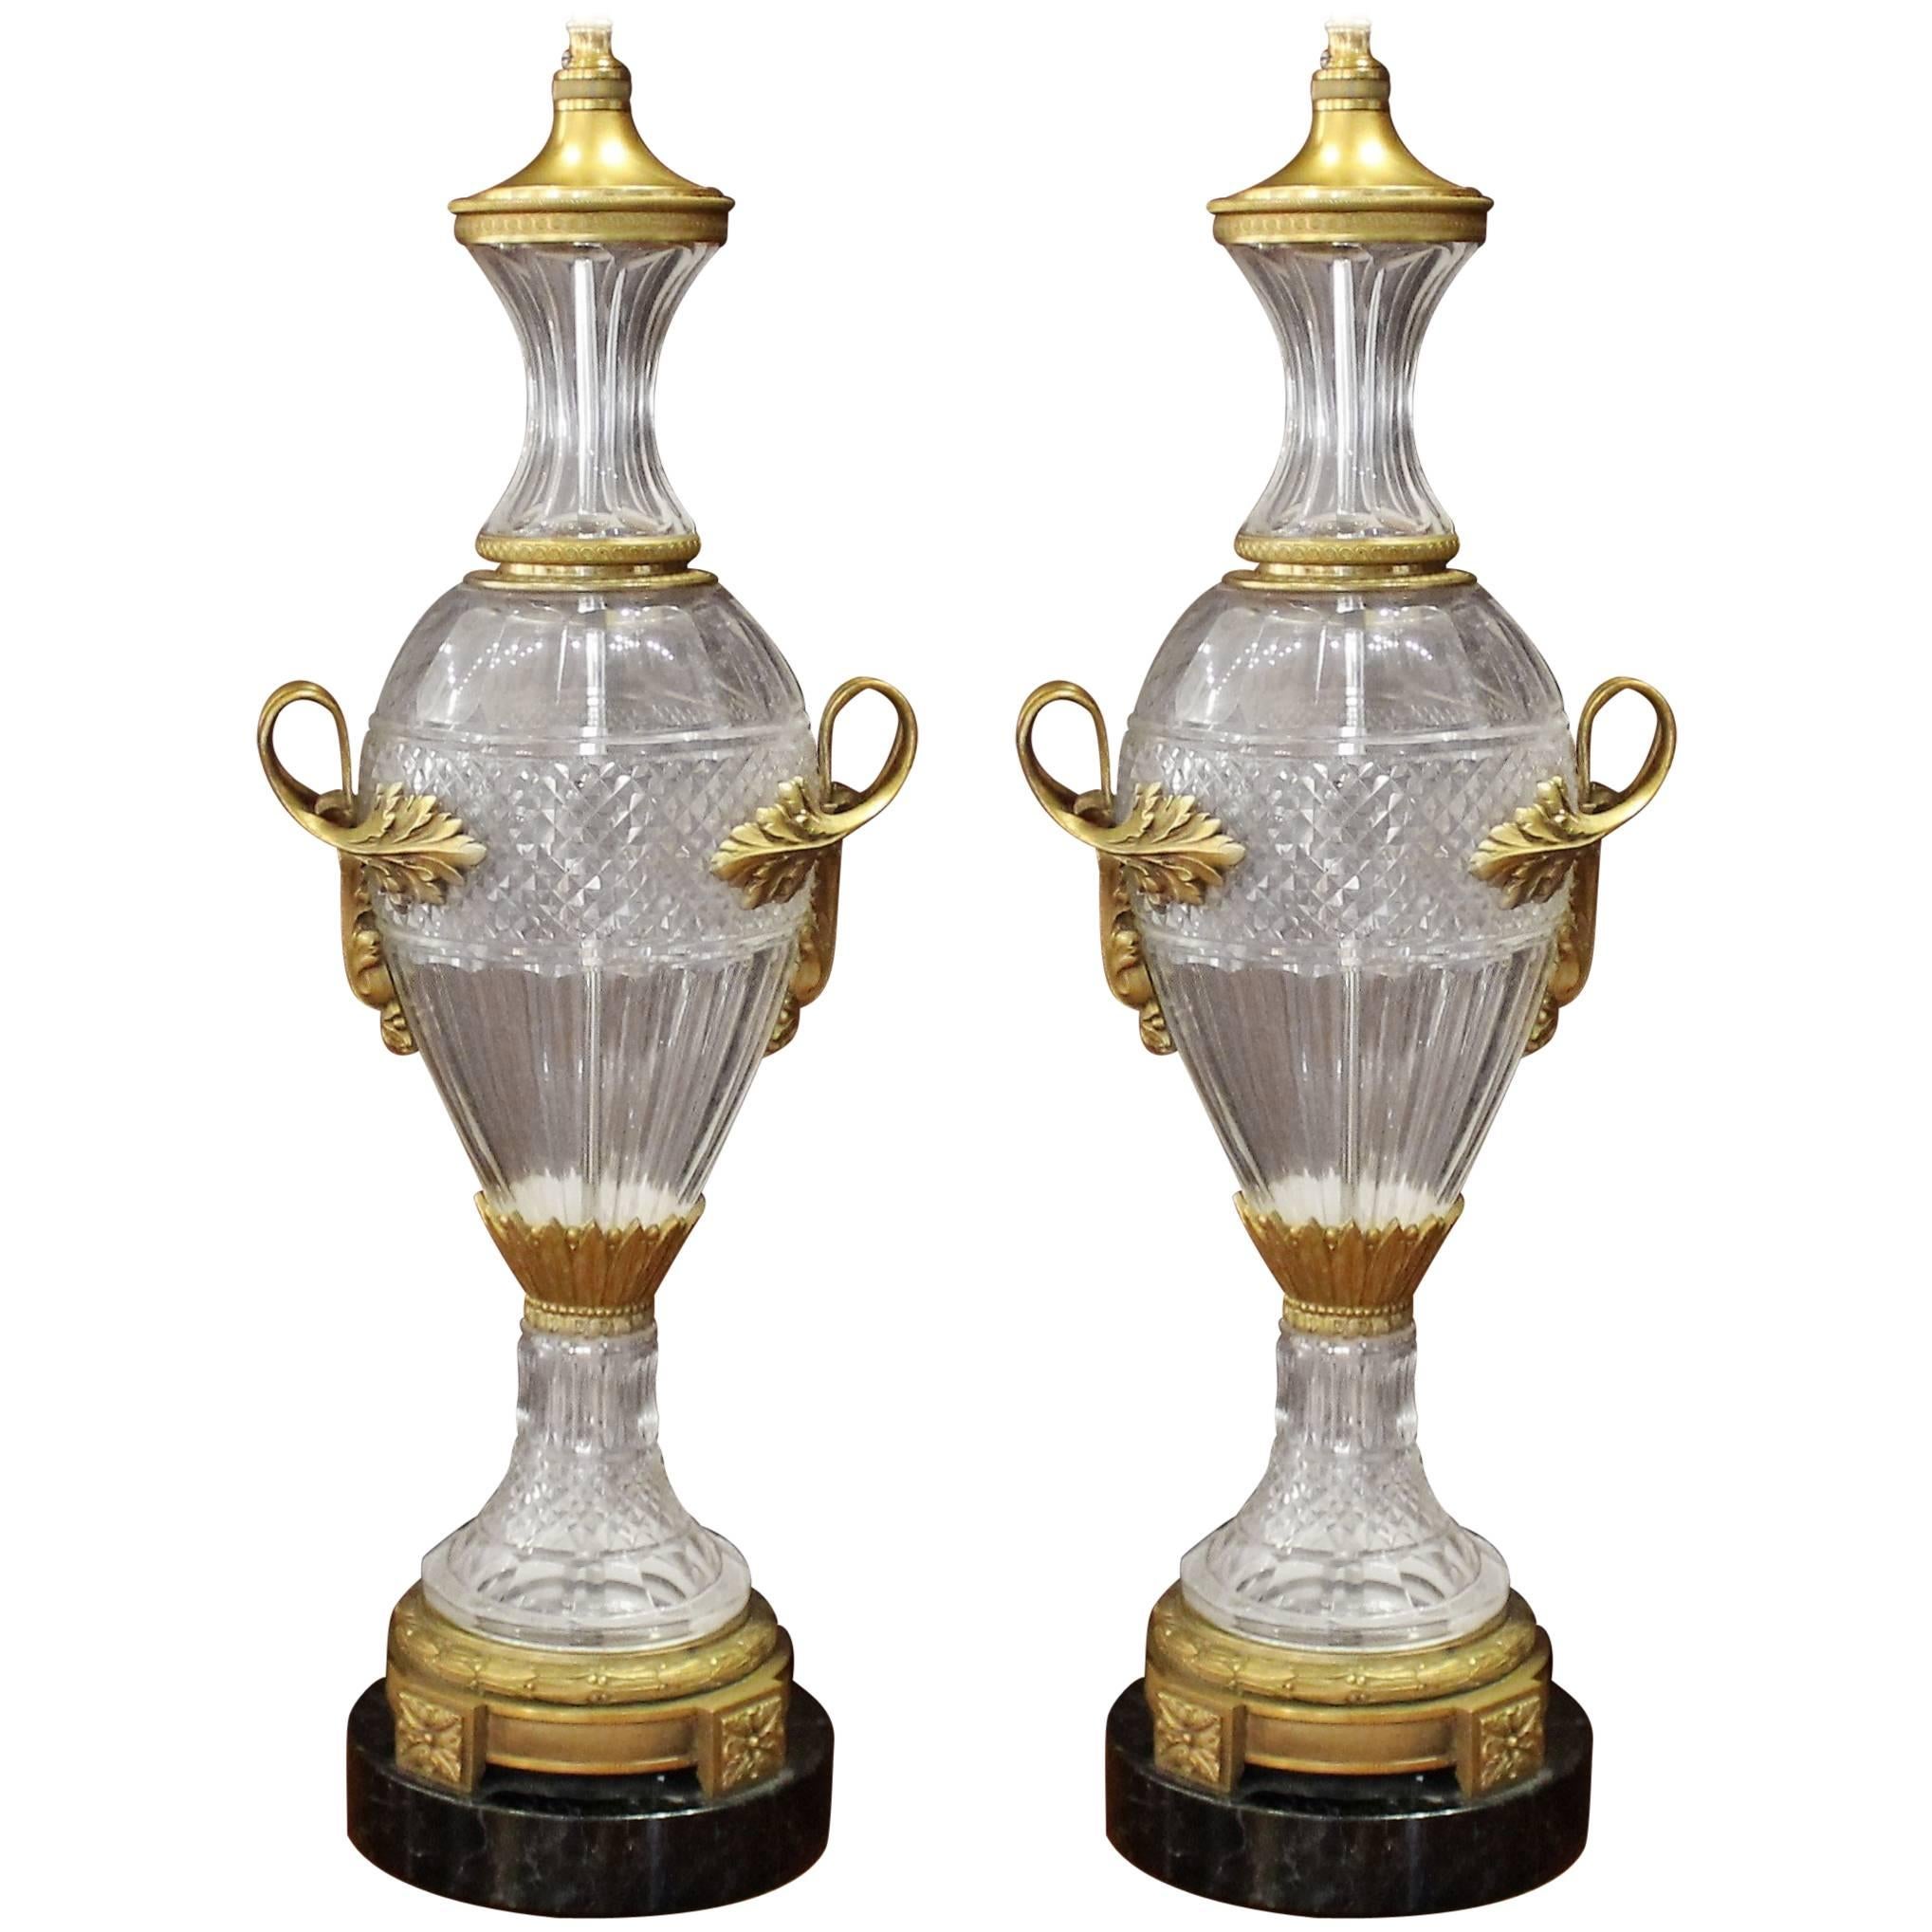 Pair of Louis XVI Style Cut Crystal Lamps with Gilt Bronze Mounts